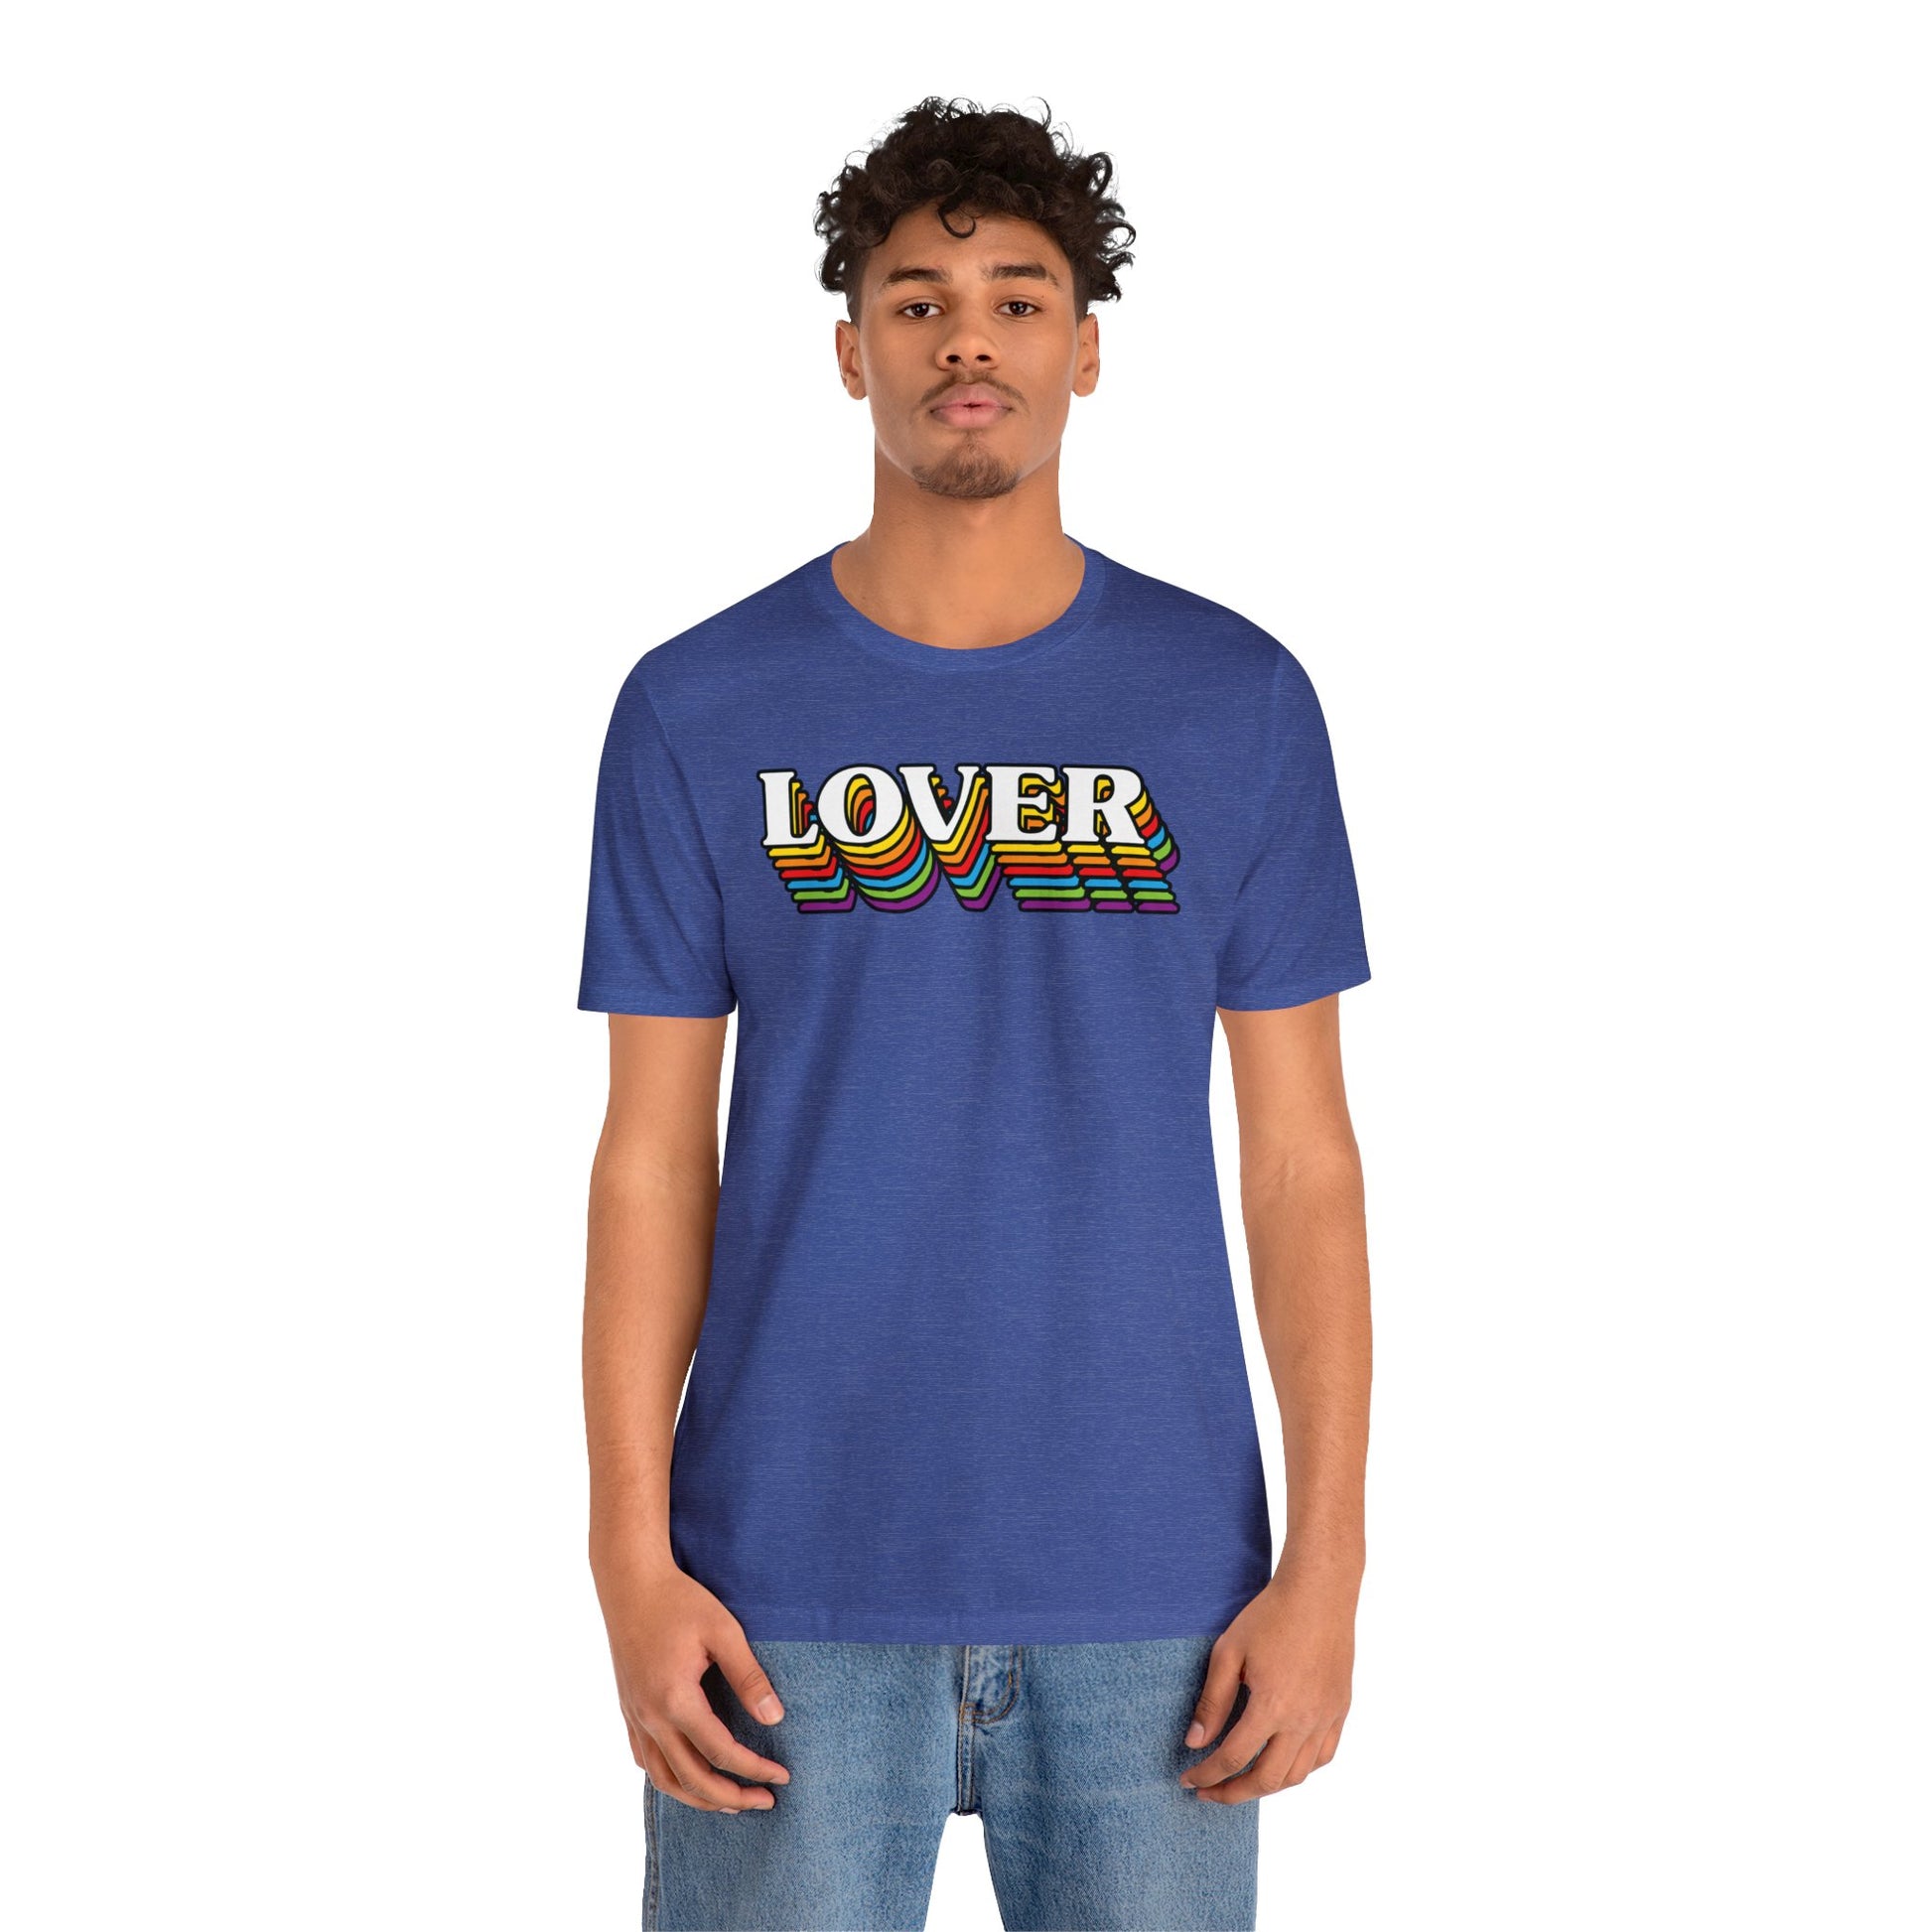 Lover - Wicked Naughty Apparel